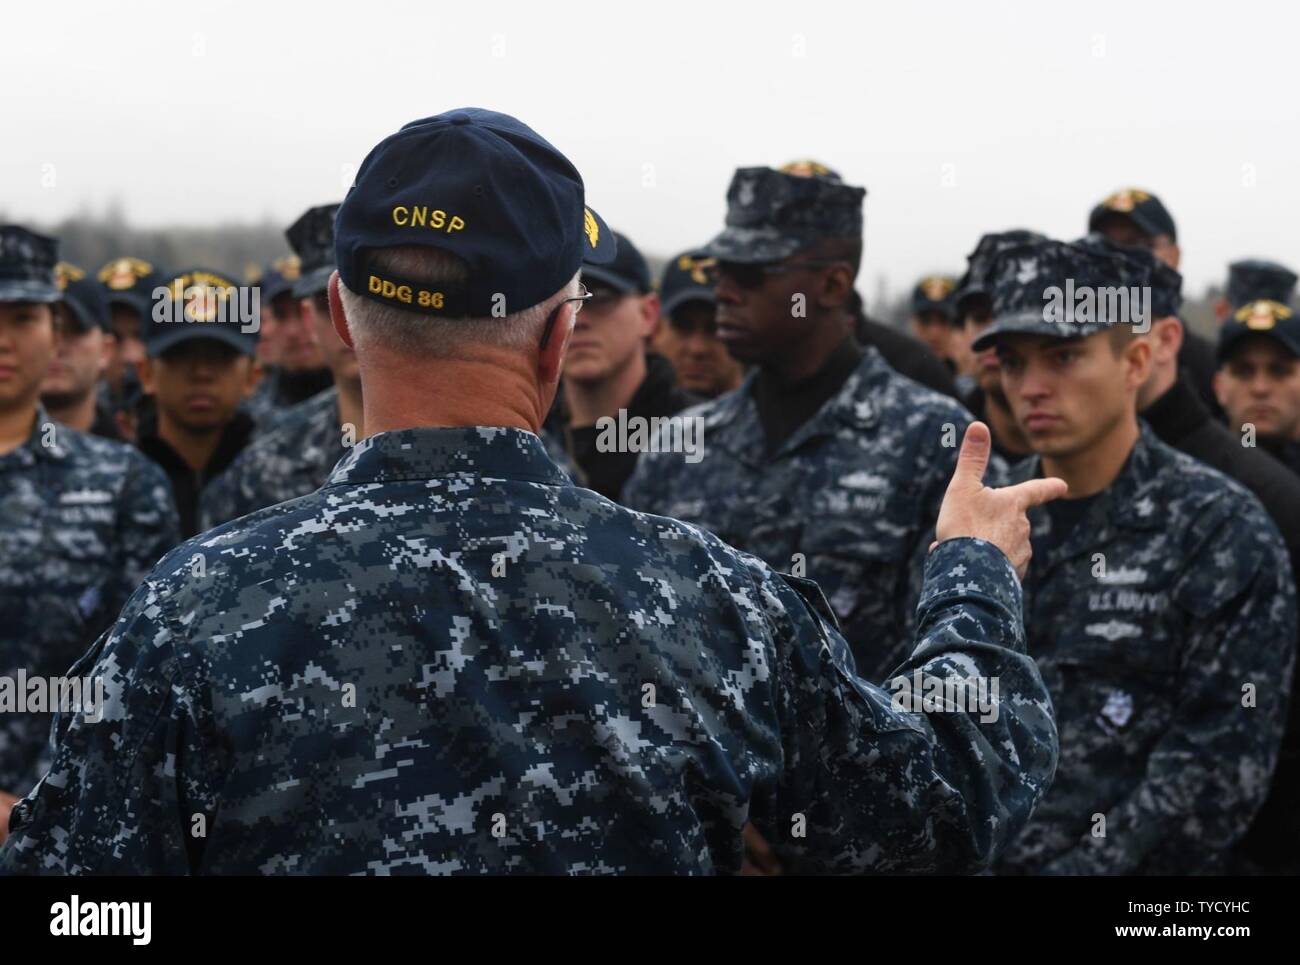 EVERETT, Wash. (Nov. 1, 2016) Vice Adm. Thomas Rowden, commander, Naval Surface Forces, U.S. Pacific Fleet, speaks to Sailors assigned to the Arleigh Burke-class guided-missile destroyer USS Shoup (DDG 86) during his visit to Naval Station Everett. Ship visits provide Rowden, who oversees combat, material and personnel readiness of surface ships in the Pacific Fleet, an opportunity to meet the crew and discuss initiatives and receive feedback directly from Sailors. Stock Photo